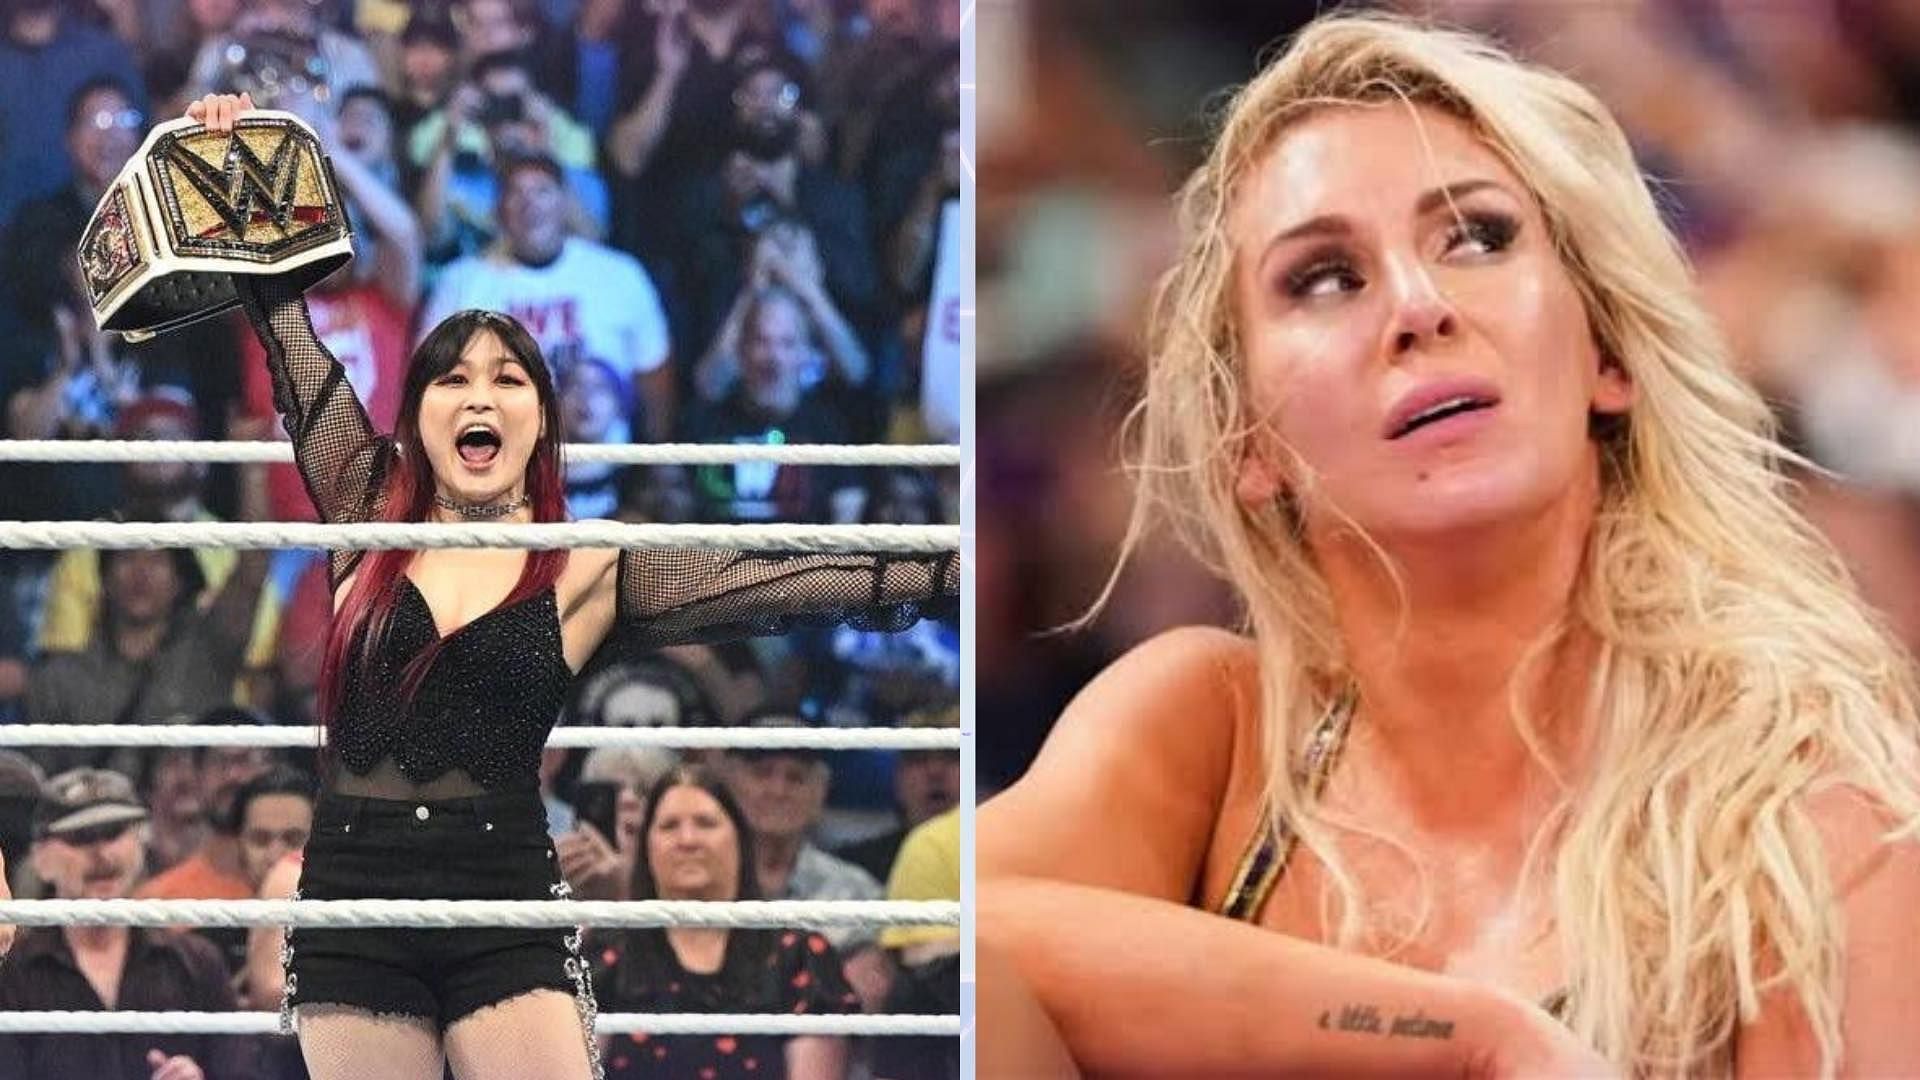 Charlotte Flair and IYO SKY will clash on WWE SmackDown